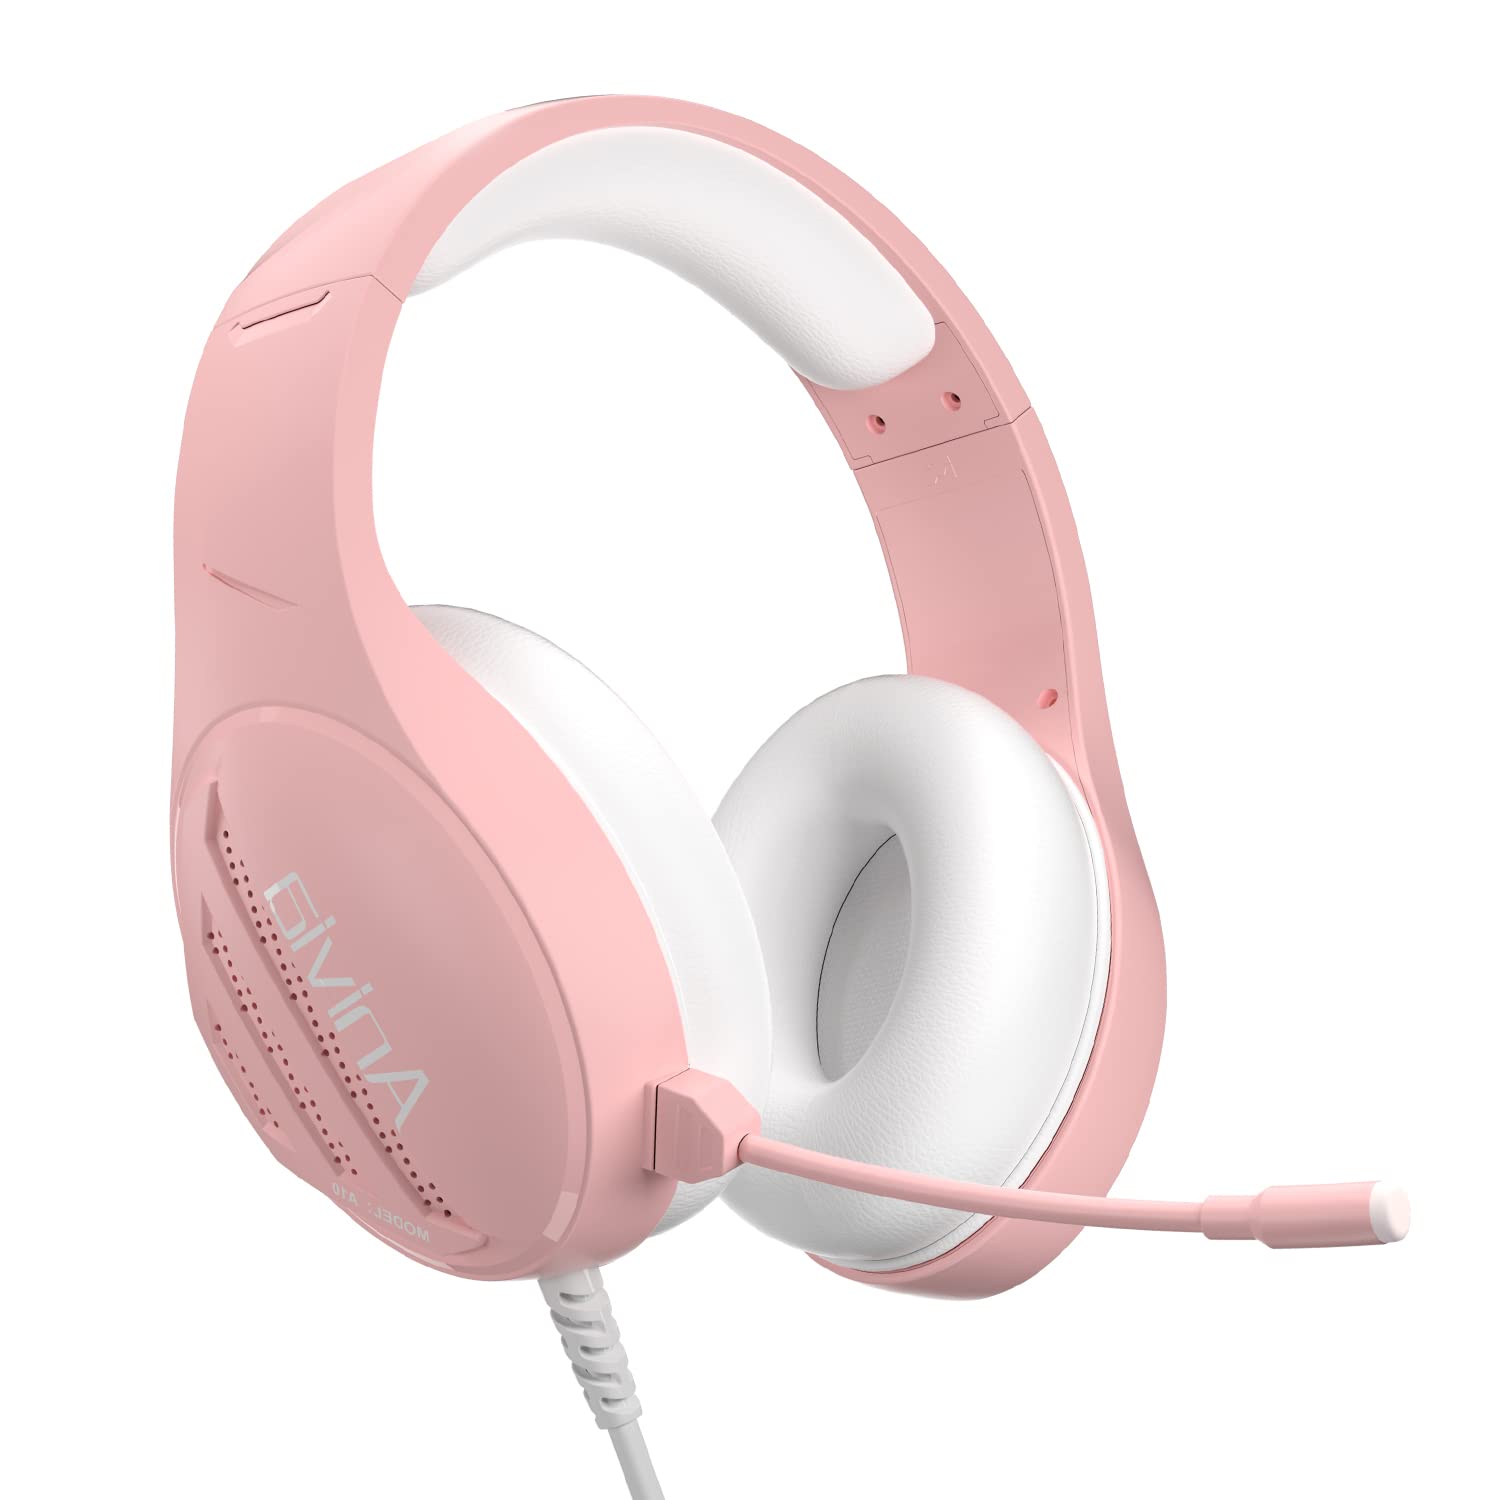 Anivia Computer Headsets Over Ear Stereo Surround Sound Wired Headphones Wired Gaming Headset with Mic for PC MAC PS4 PS5 Xbox One, Pink